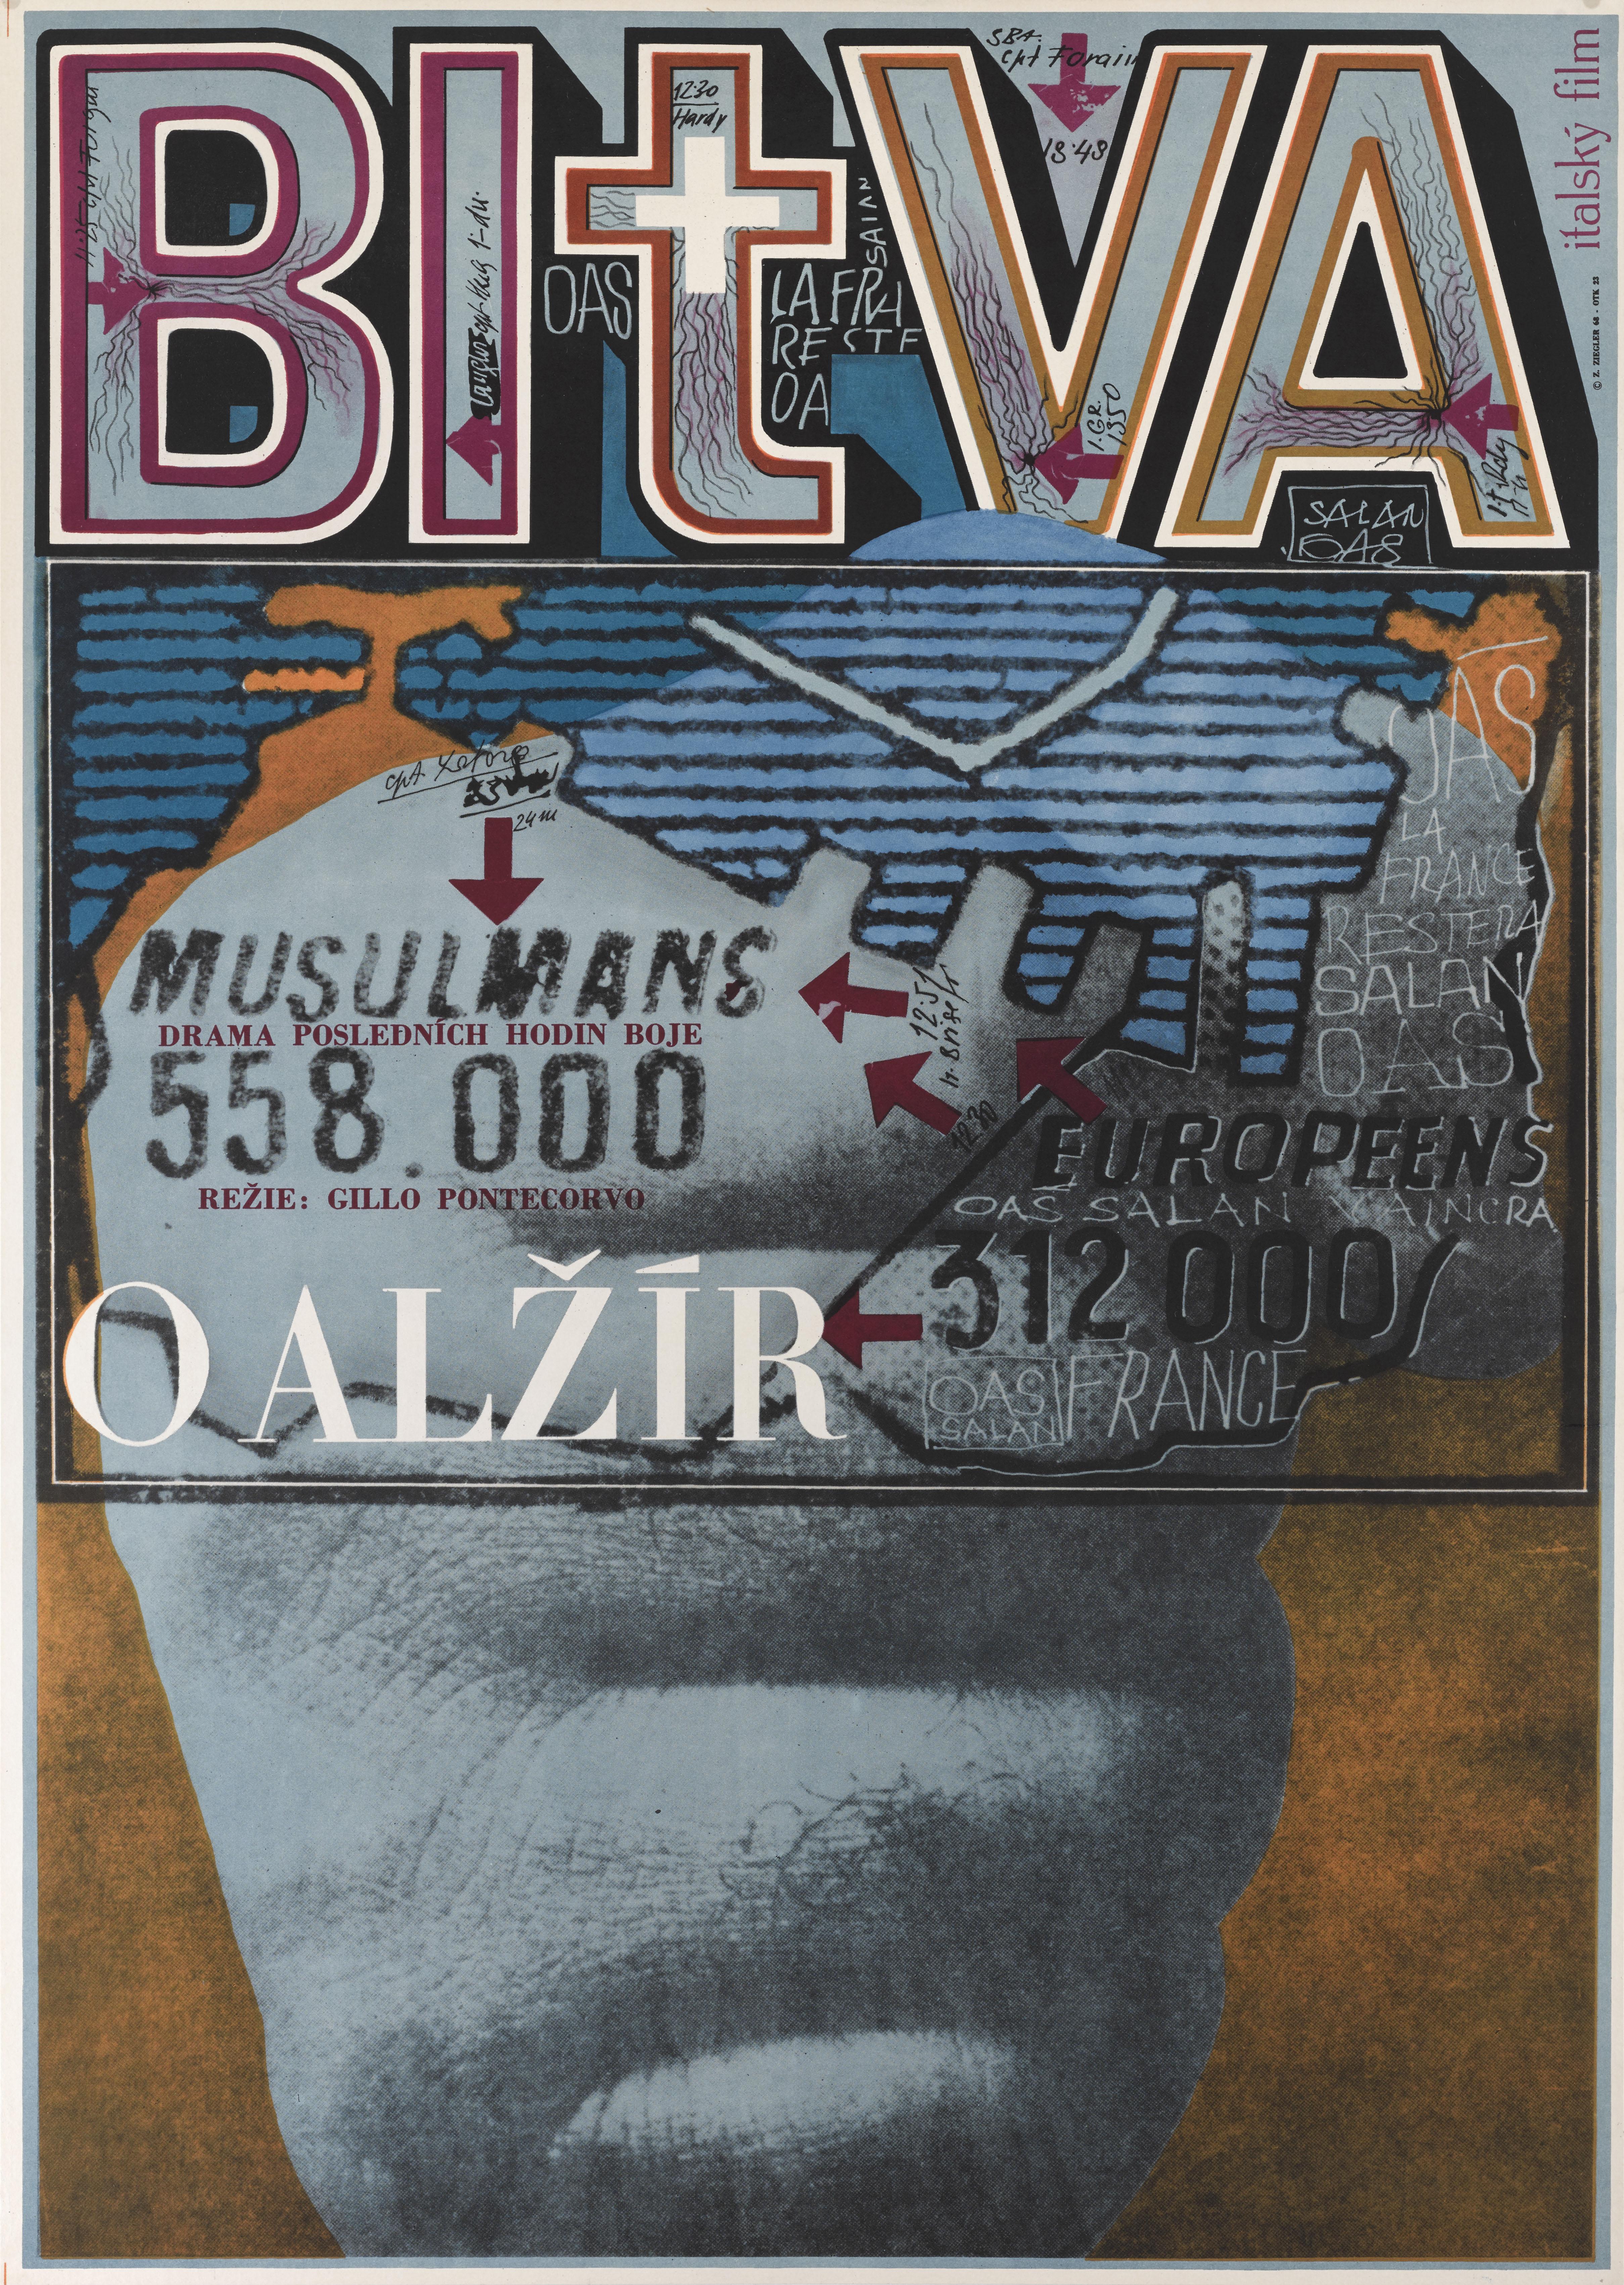 Original Czechoslovakian film poster for the 1966 War drama directed by Gillo Pontecorvo and starred Brahim Hadjadj, Jean Martin and Yacef Saadi.
This extremely cool poster was designed by the Czech artist Zdenek Ziegler (b.1932)
This poster is